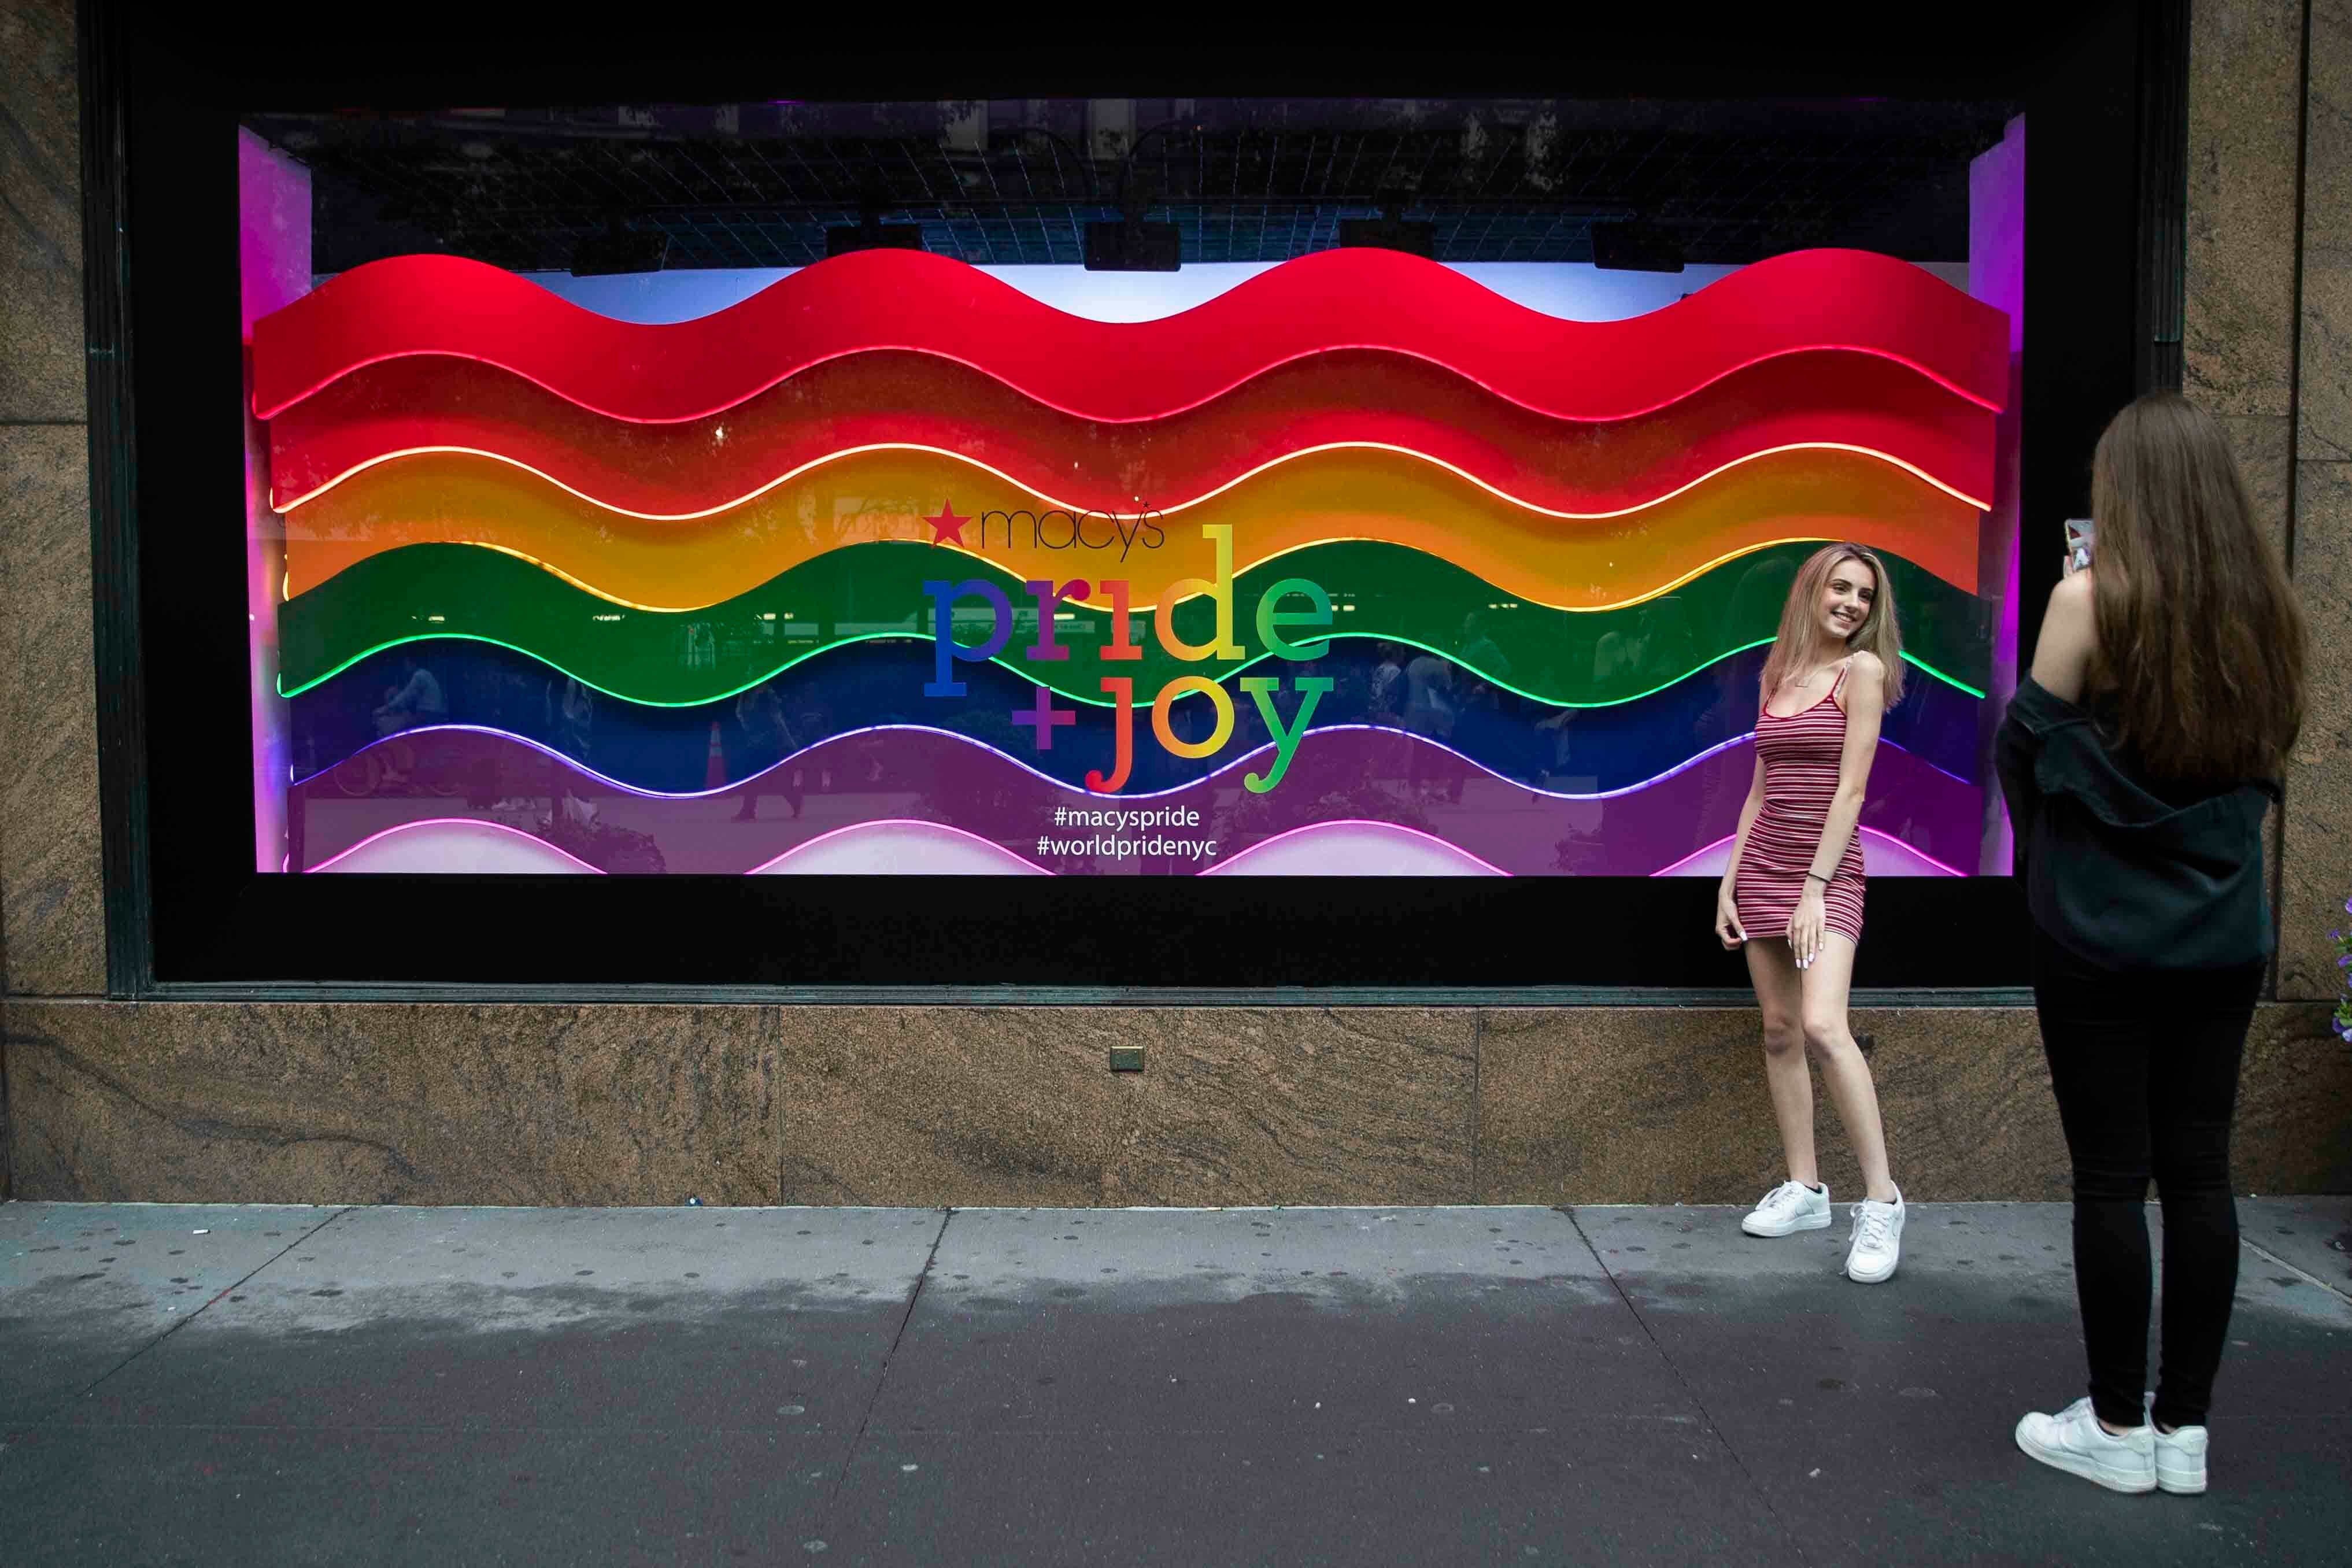 Retail Stores Celebrate LGBTQ Pride With Rainbow Decorations